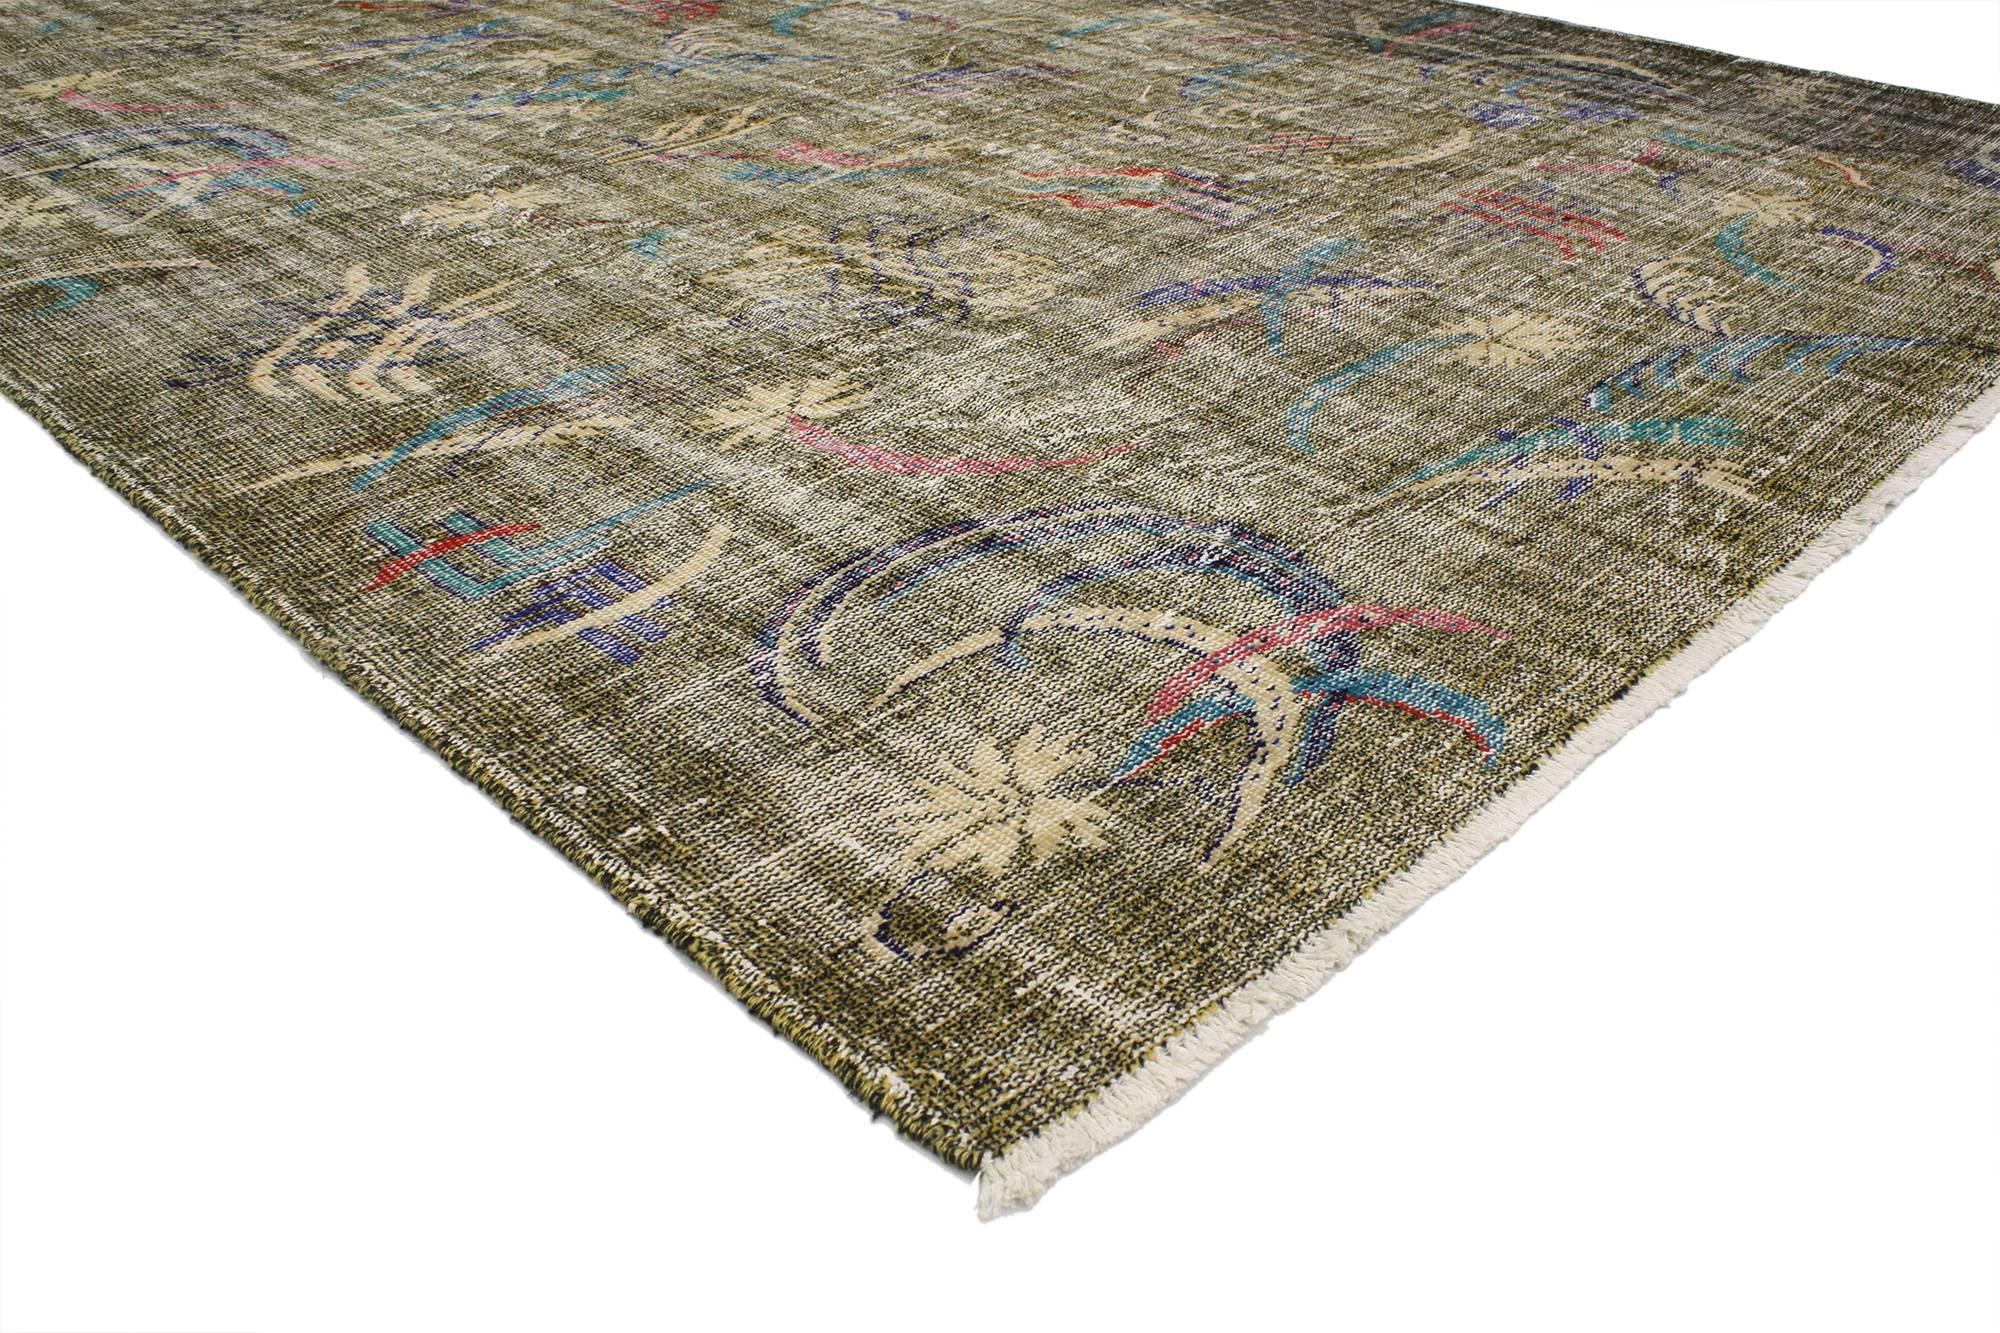 52126, distressed vintage Turkish Sivas rug with Industrial style. Highlighting the finest trends in minimal aesthetics, this modern Industrial style rug features an all-over pattern in neutral colors. From the distressed composition to the gently